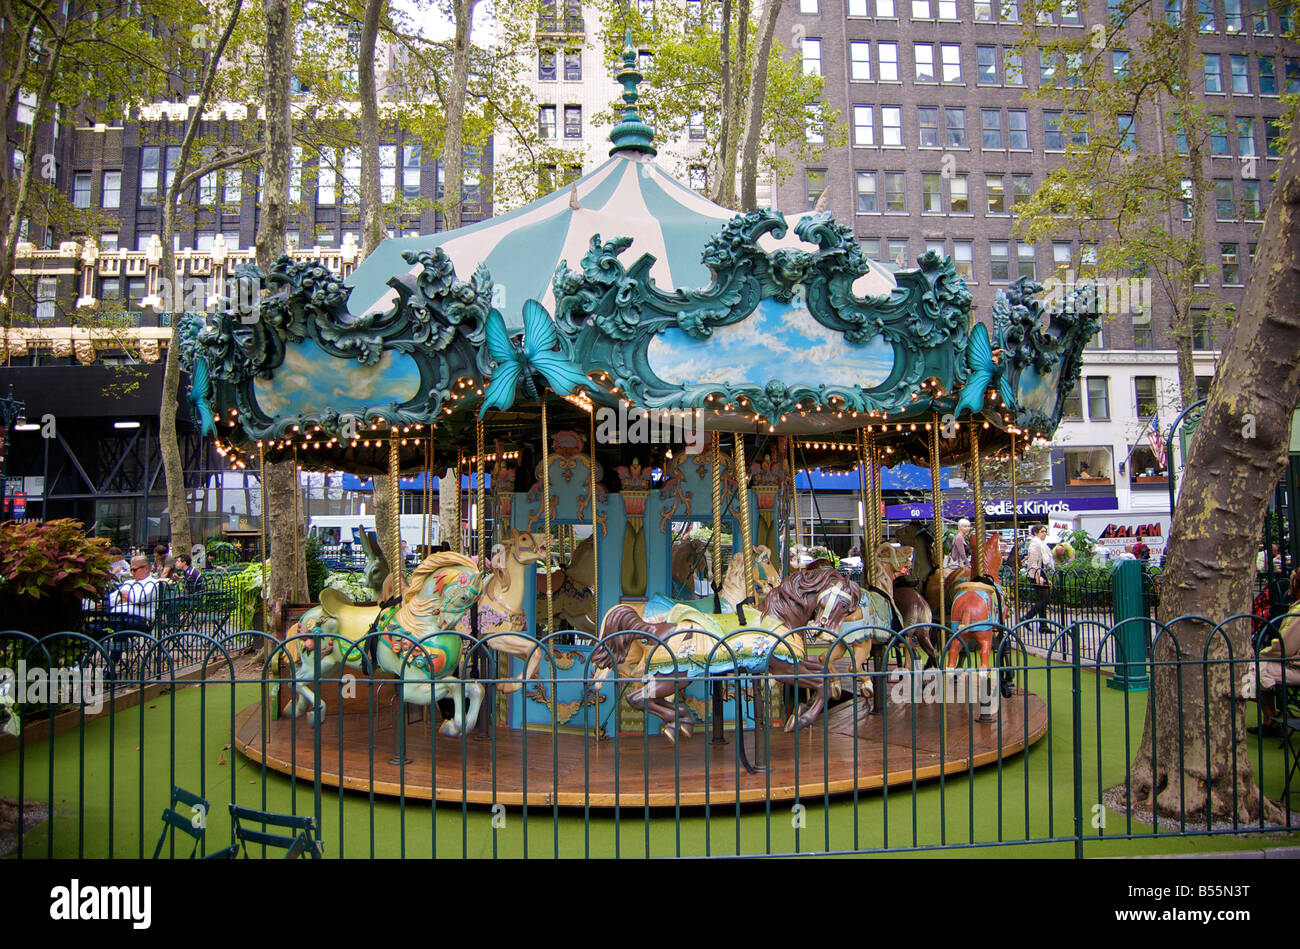 Colorful Carousel in Bryant Park in New York City (For Editorial Use Only) Stock Photo